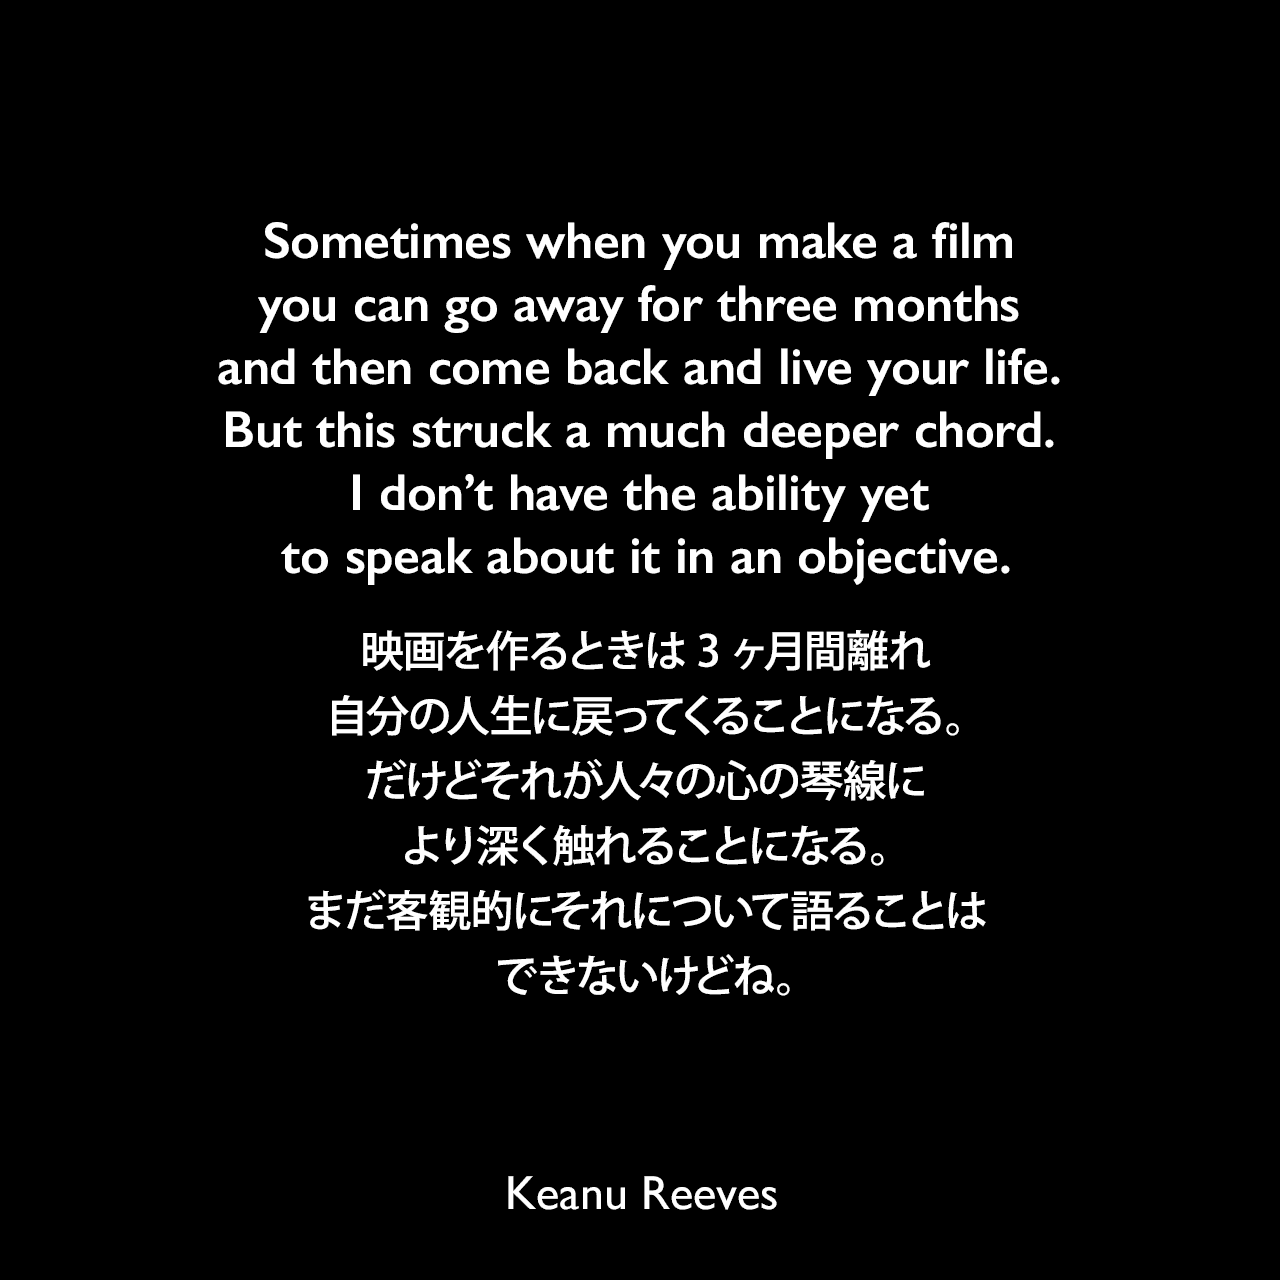 Sometimes when you make a film you can go away for three months and then come back and live your life. But this struck a much deeper chord. I don’t have the ability yet to speak about it in an objective.映画を作るときは3ヶ月間離れ、自分の人生に戻ってくることになる。だけどそれが人々の心の琴線により深く触れることになる。まだ客観的にそれについて語ることはできないけどね。Keanu Reeves